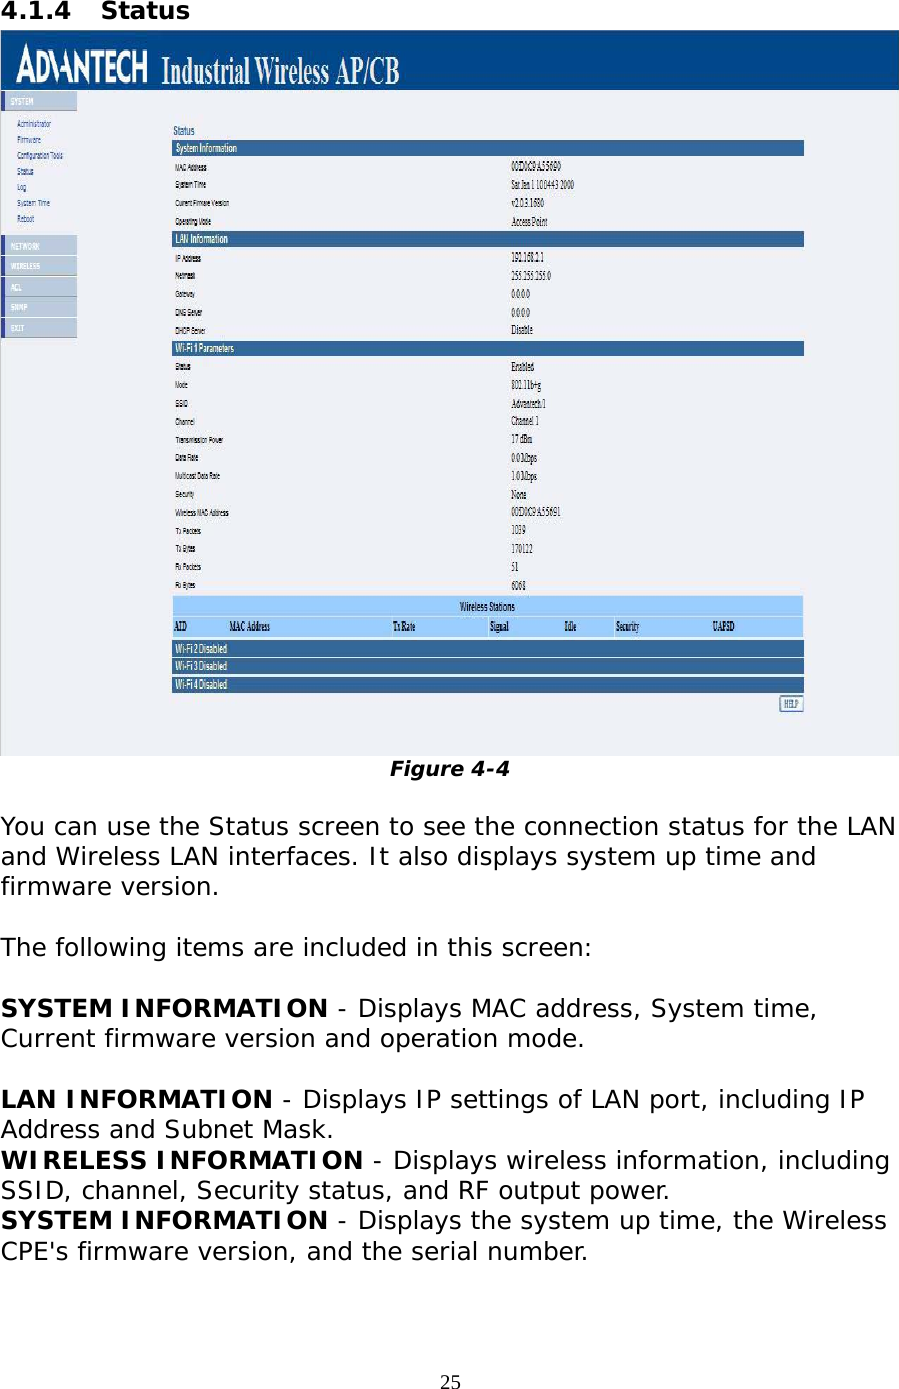                   4.1.4 Status  Figure 4-4  You can use the Status screen to see the connection status for the LAN and Wireless LAN interfaces. It also displays system up time and firmware version.  The following items are included in this screen:  SYSTEM INFORMATION - Displays MAC address, System time, Current firmware version and operation mode.  LAN INFORMATION - Displays IP settings of LAN port, including IP Address and Subnet Mask.  WIRELESS INFORMATION - Displays wireless information, including SSID, channel, Security status, and RF output power.  SYSTEM INFORMATION - Displays the system up time, the Wireless CPE&apos;s firmware version, and the serial number. 25 